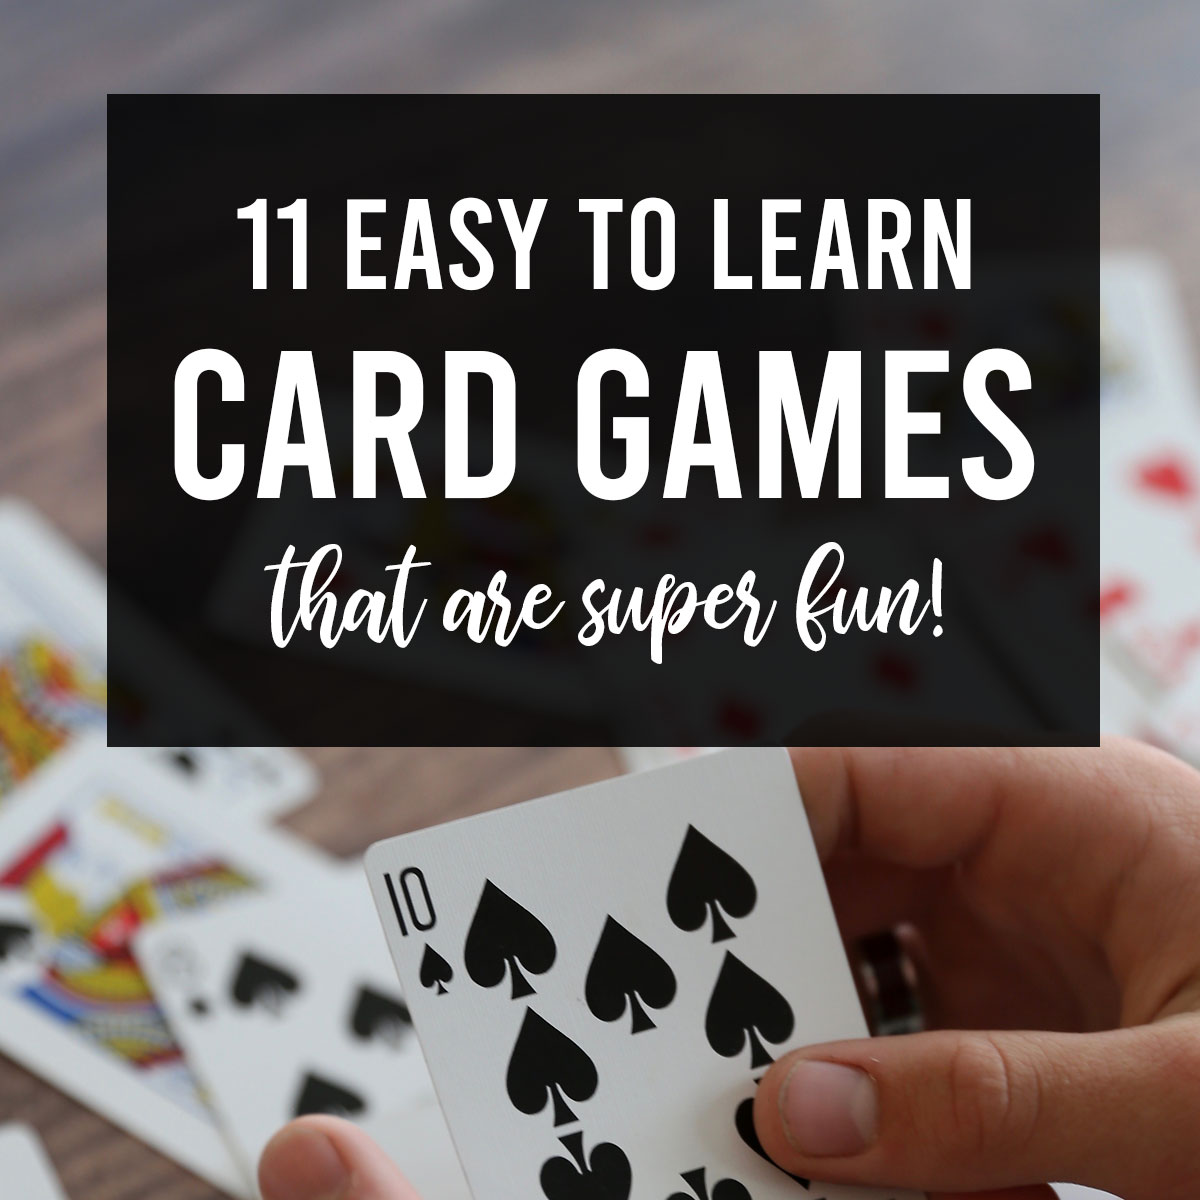 11 Fun + easy cards games for kids and adults! - It's Always Autumn